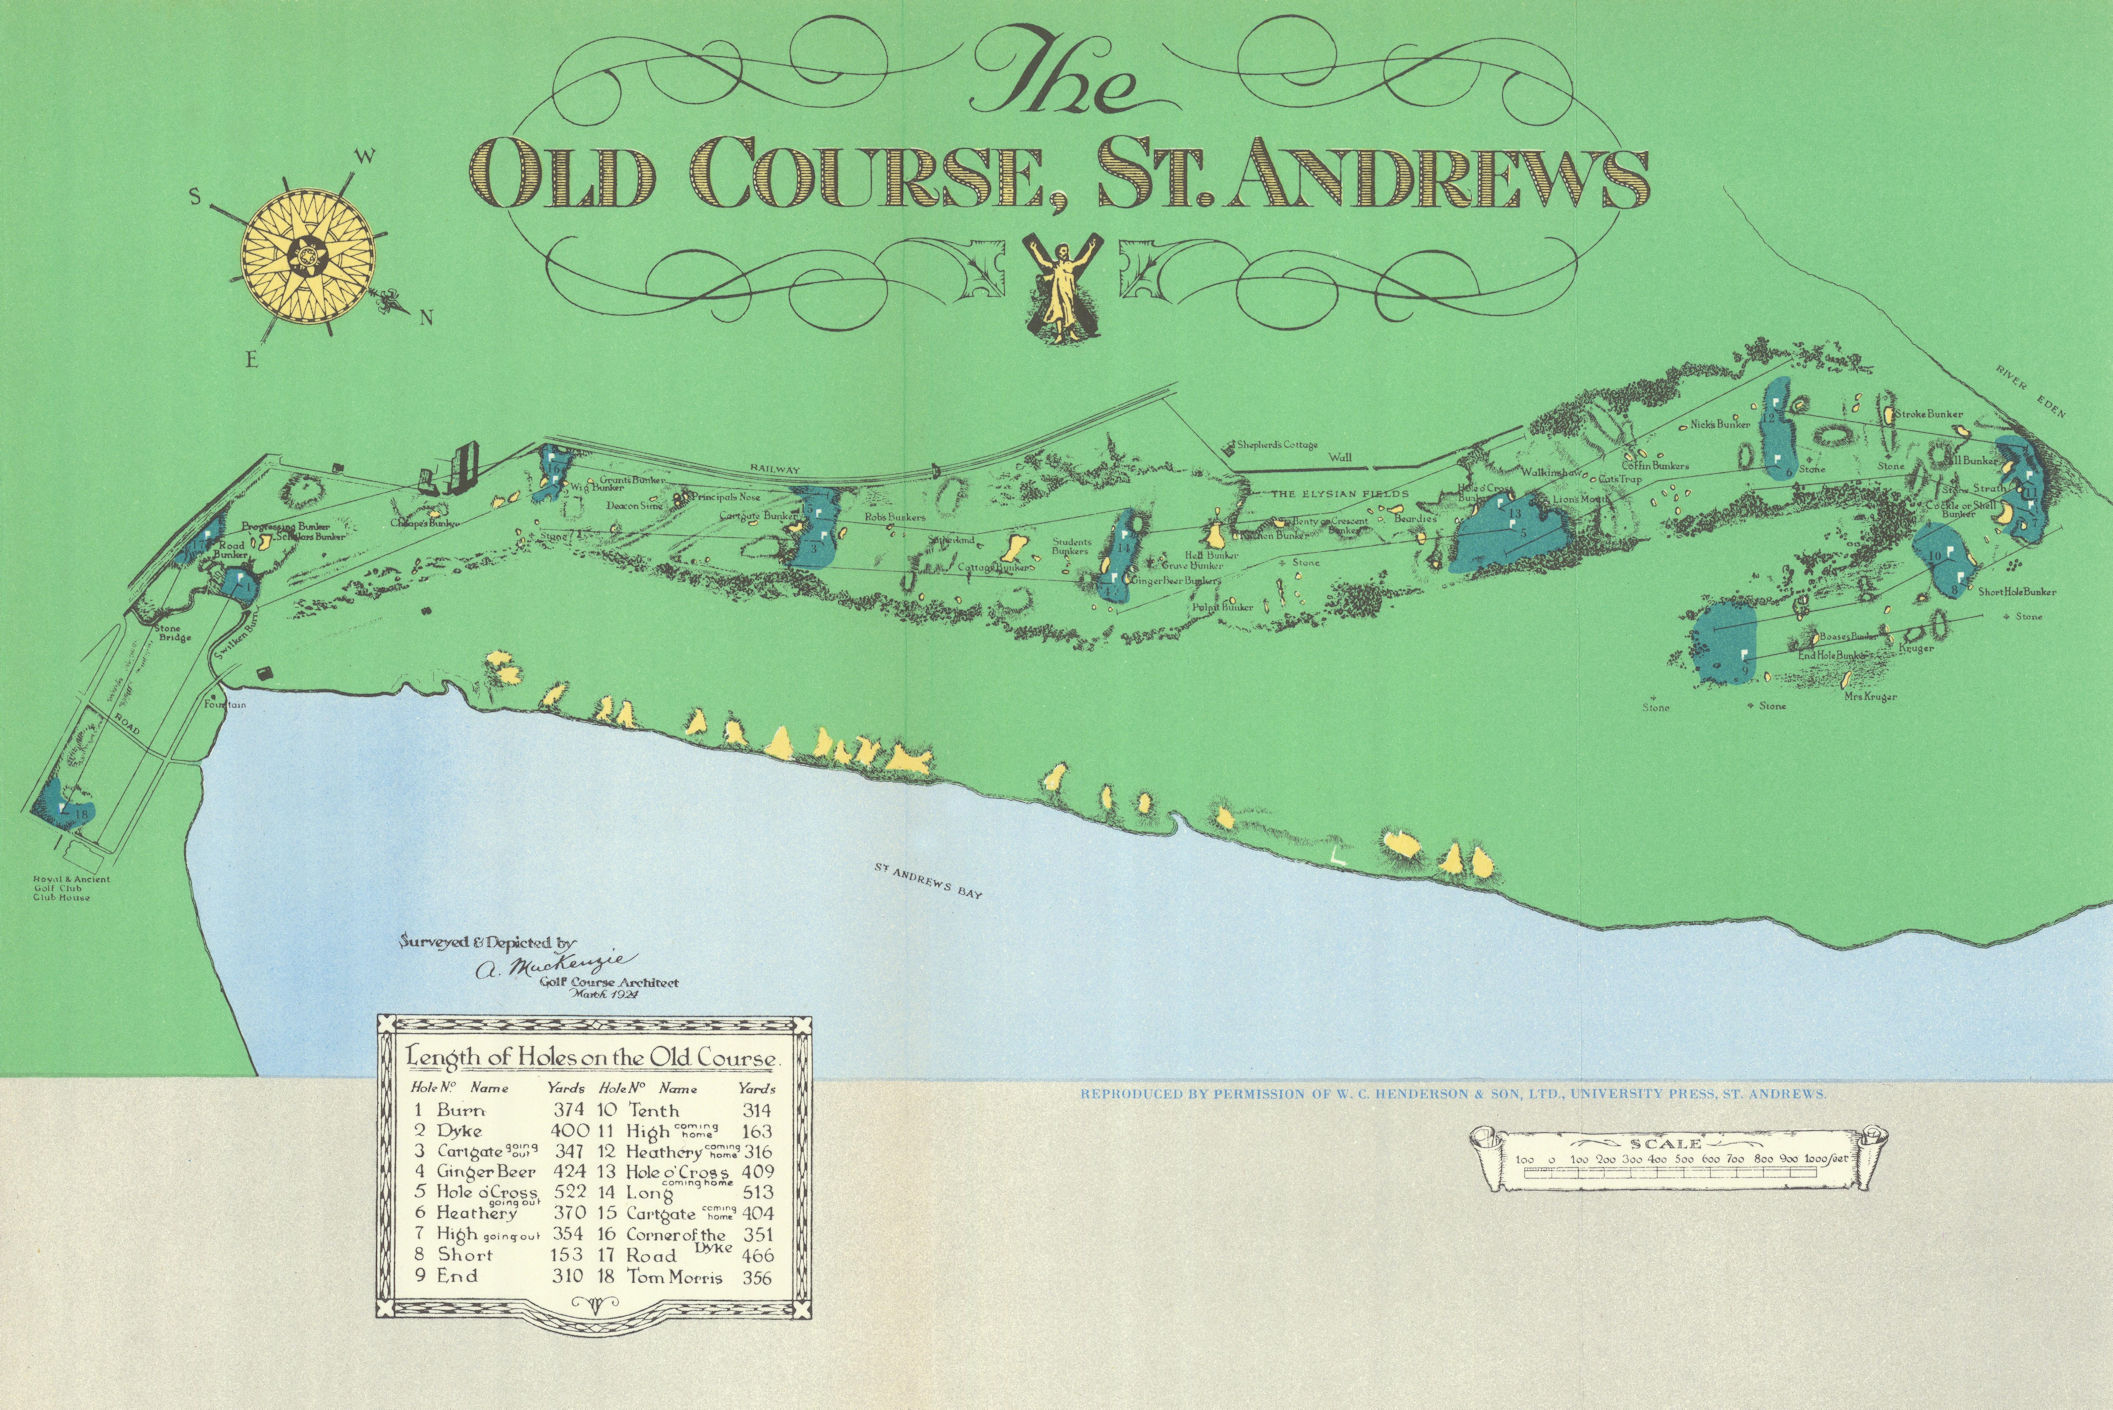 Associate Product Old Course St. Andrews. Golf course plan by Alister Mackenzie 1924 (1954) map